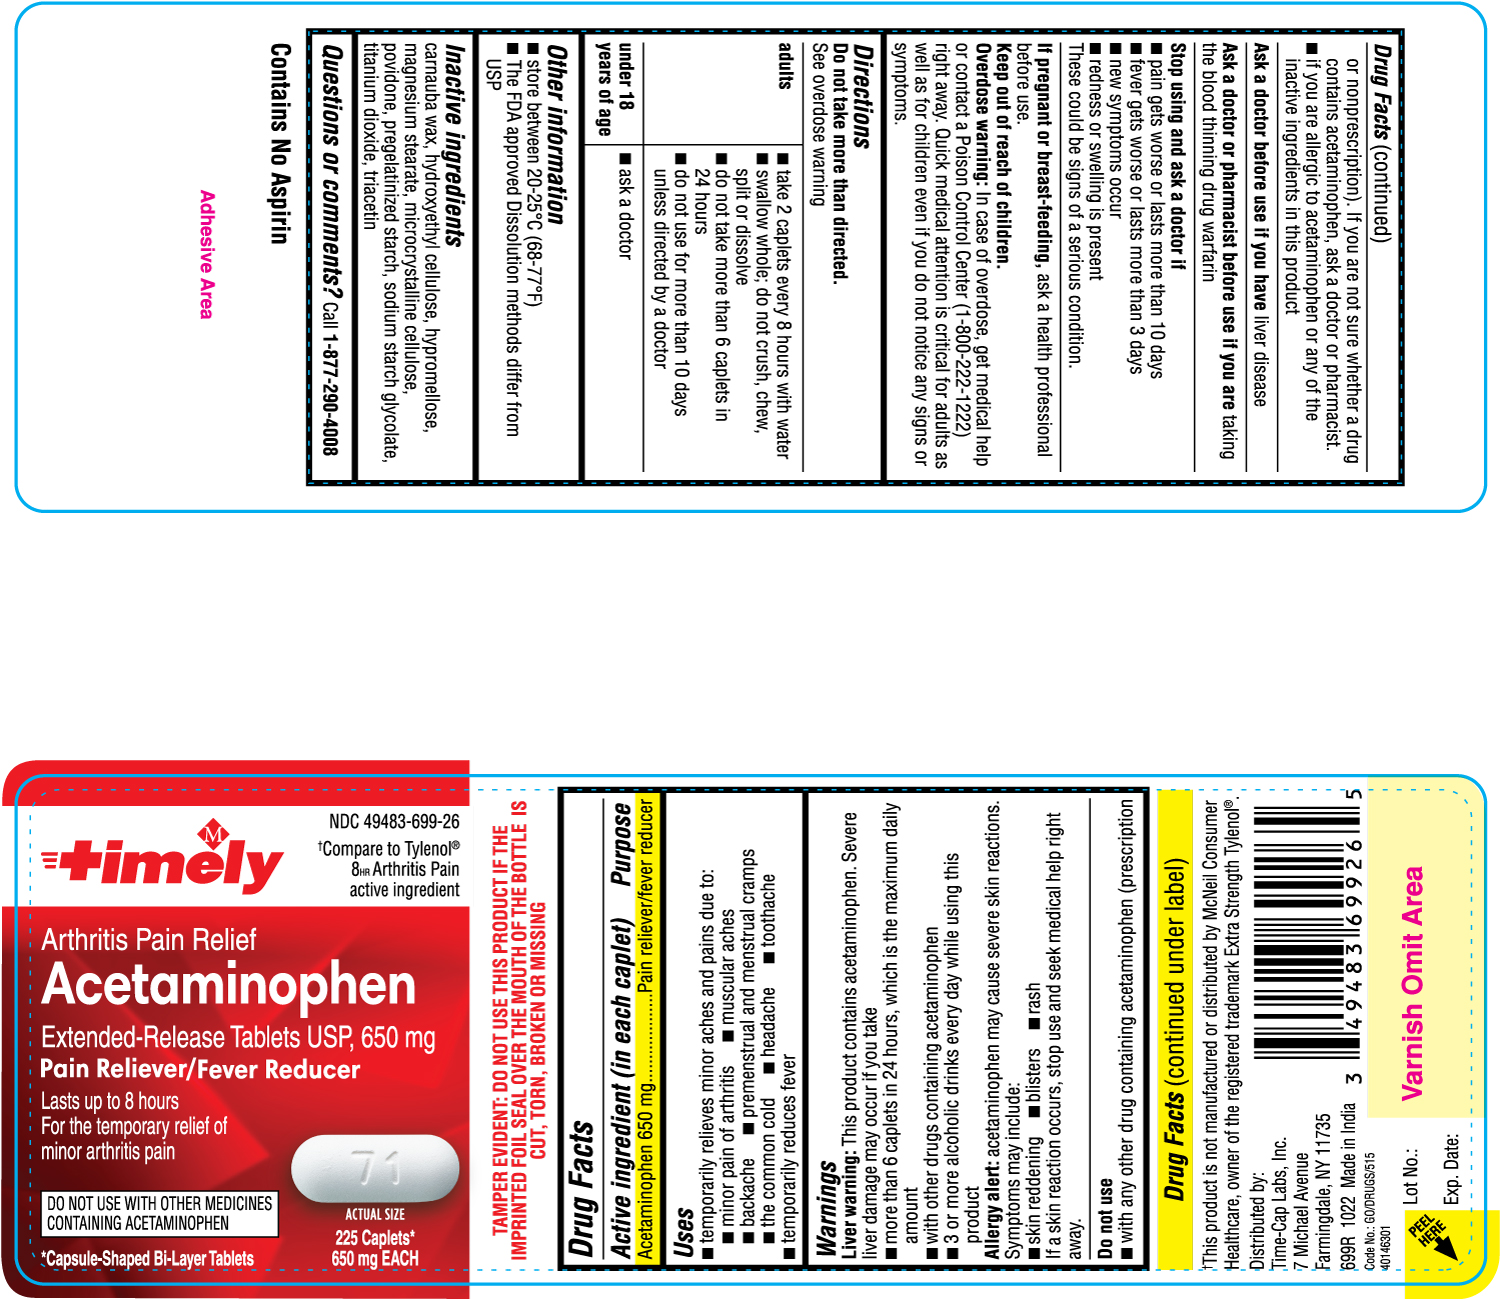 699R-Timely-APAPArthritis-225s-Label